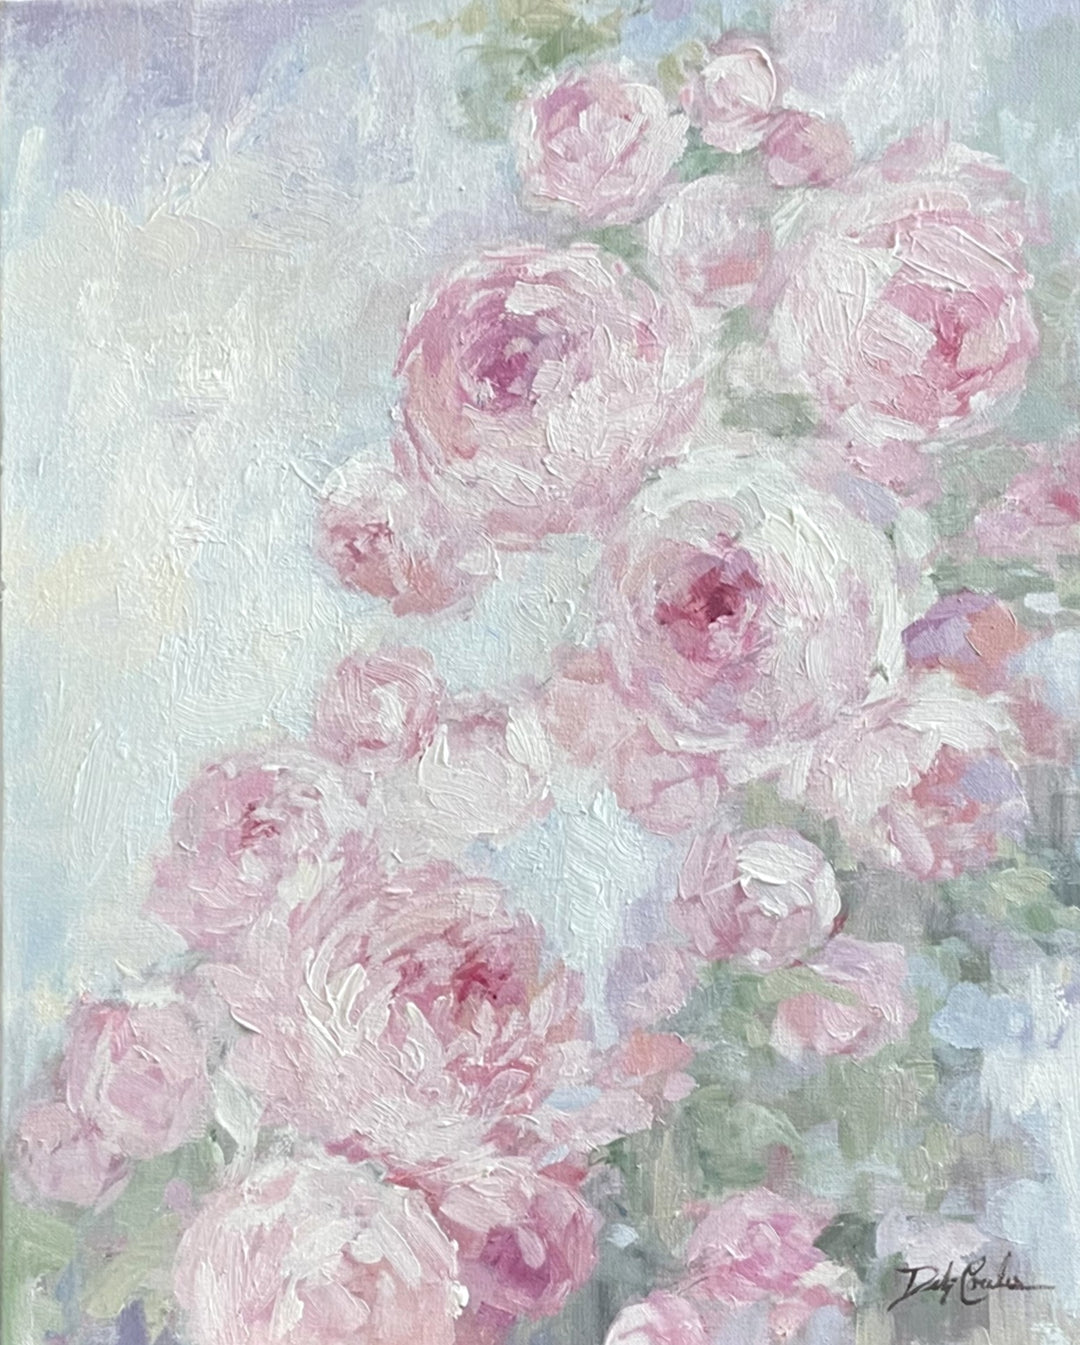 "Peonies" Pink and White Shabby Chic Modern Original Painting by Debi Coules